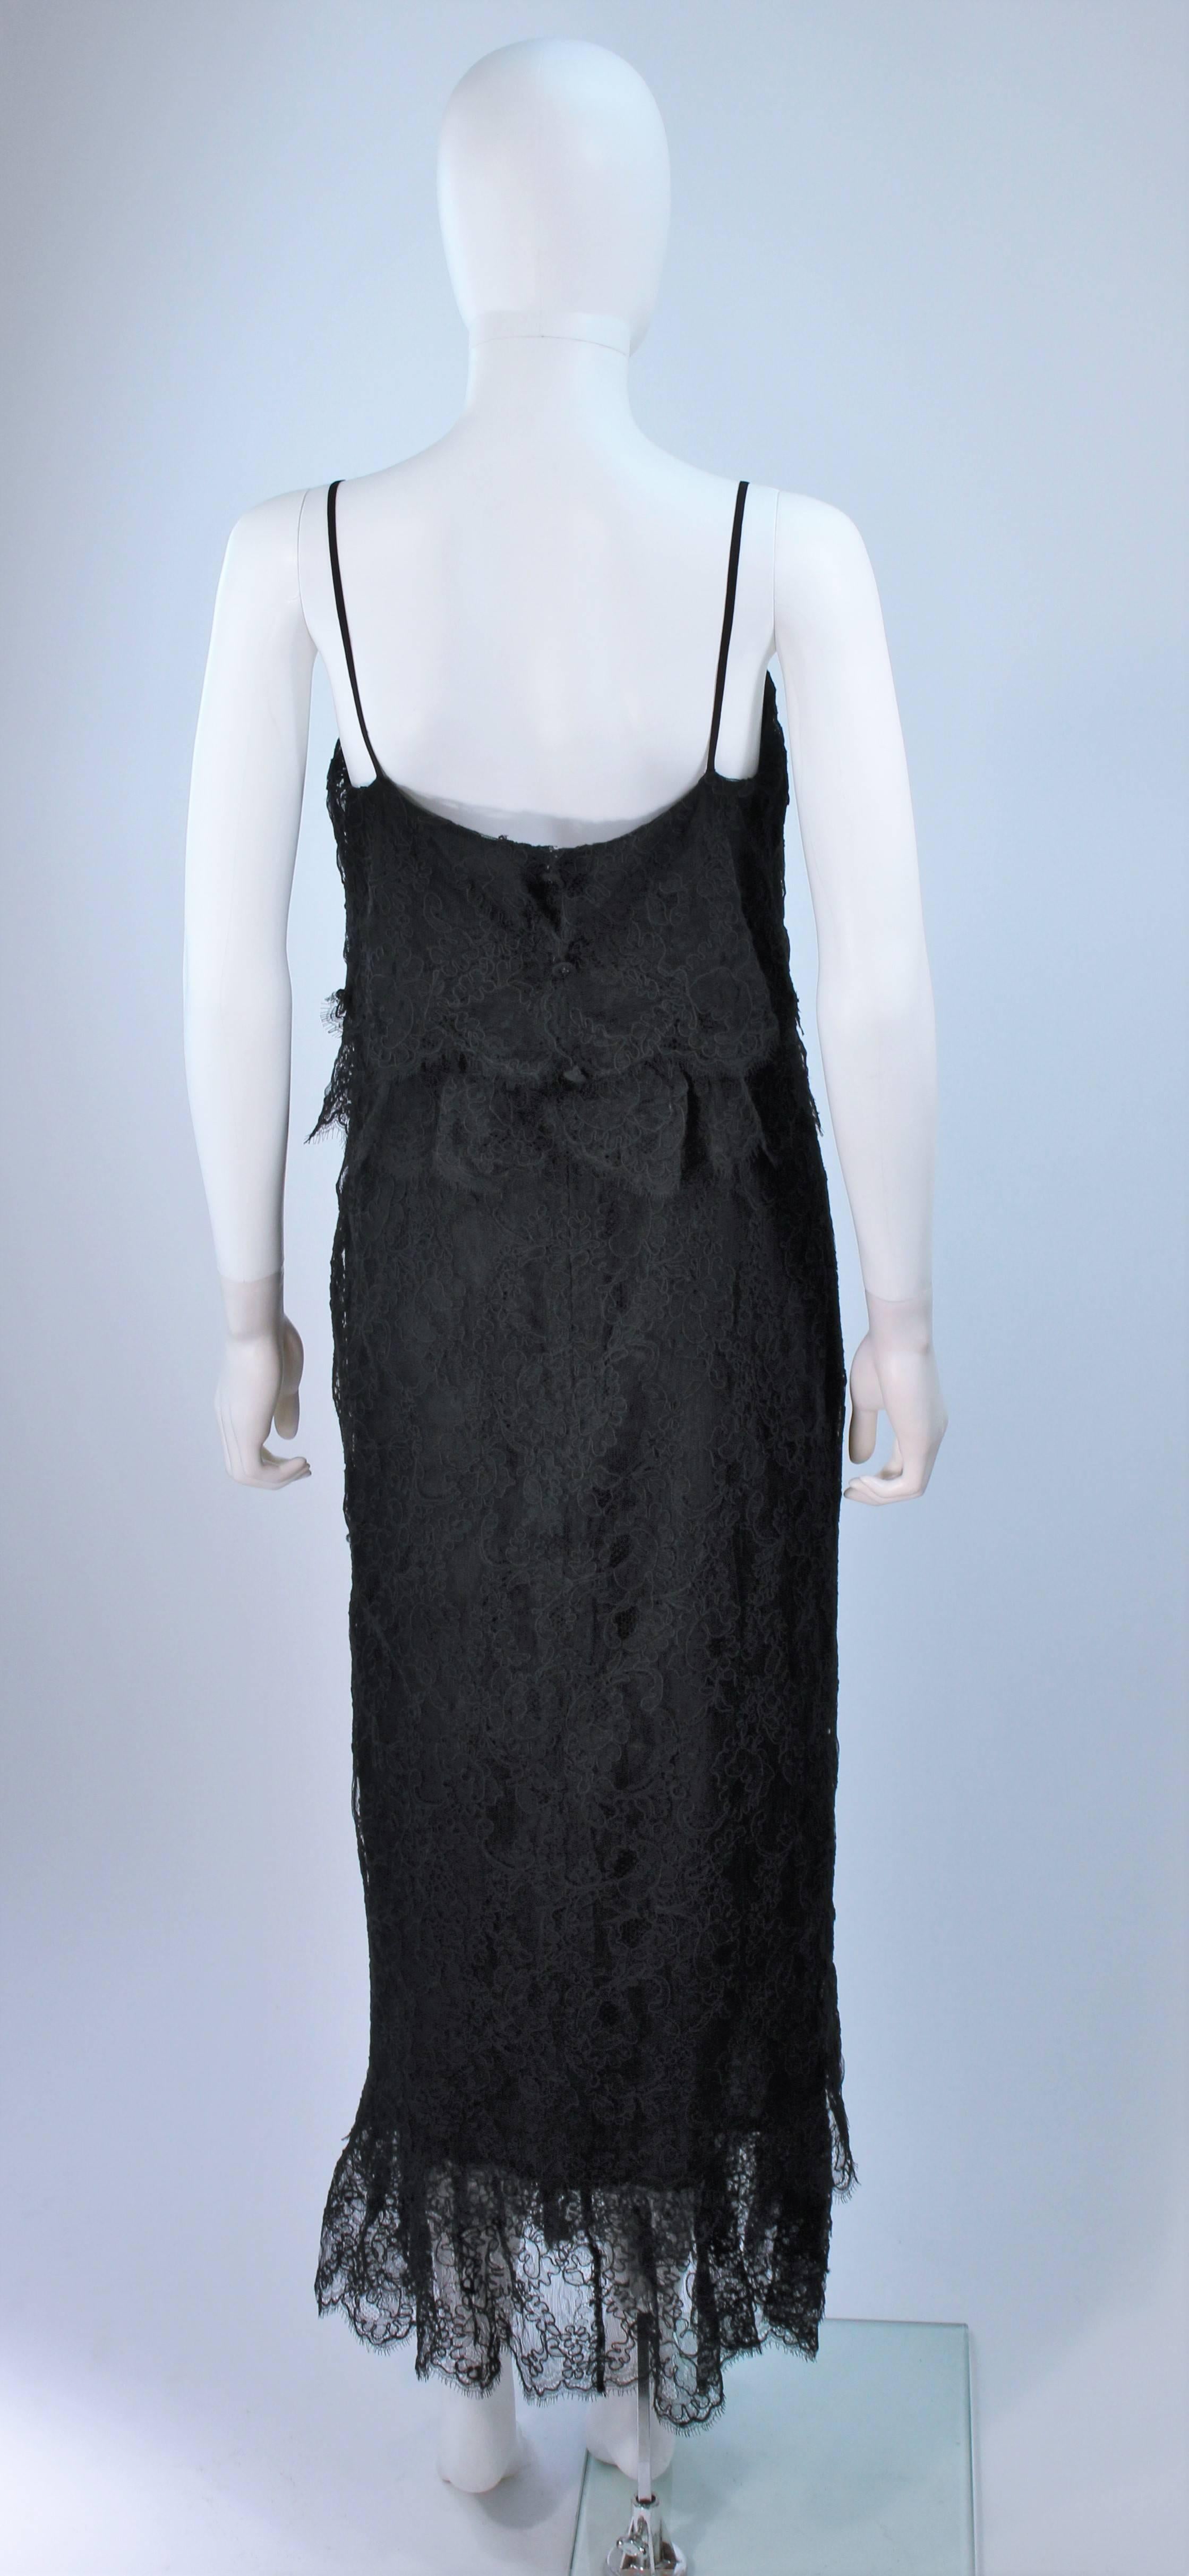 CHANEL Black Tiered Lace Dress Size 10 4